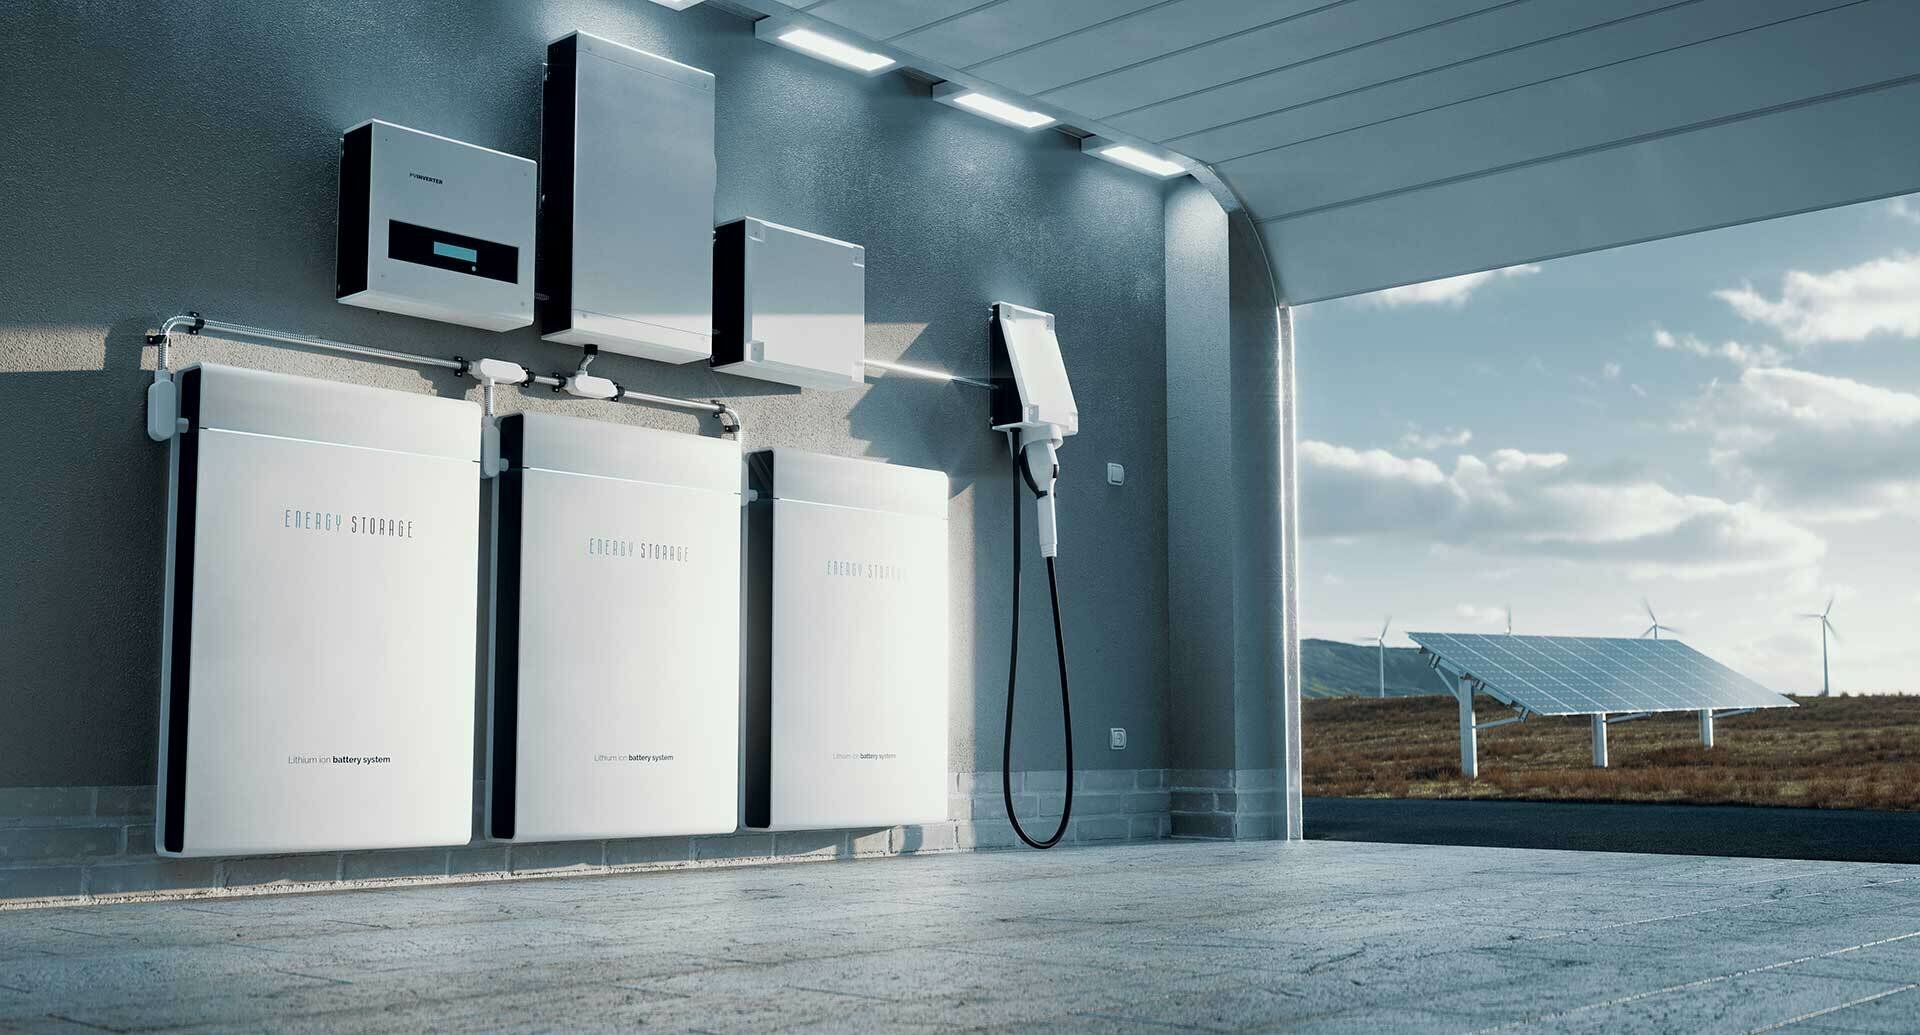 Next step in Home Battery Scheme as battery prices fall